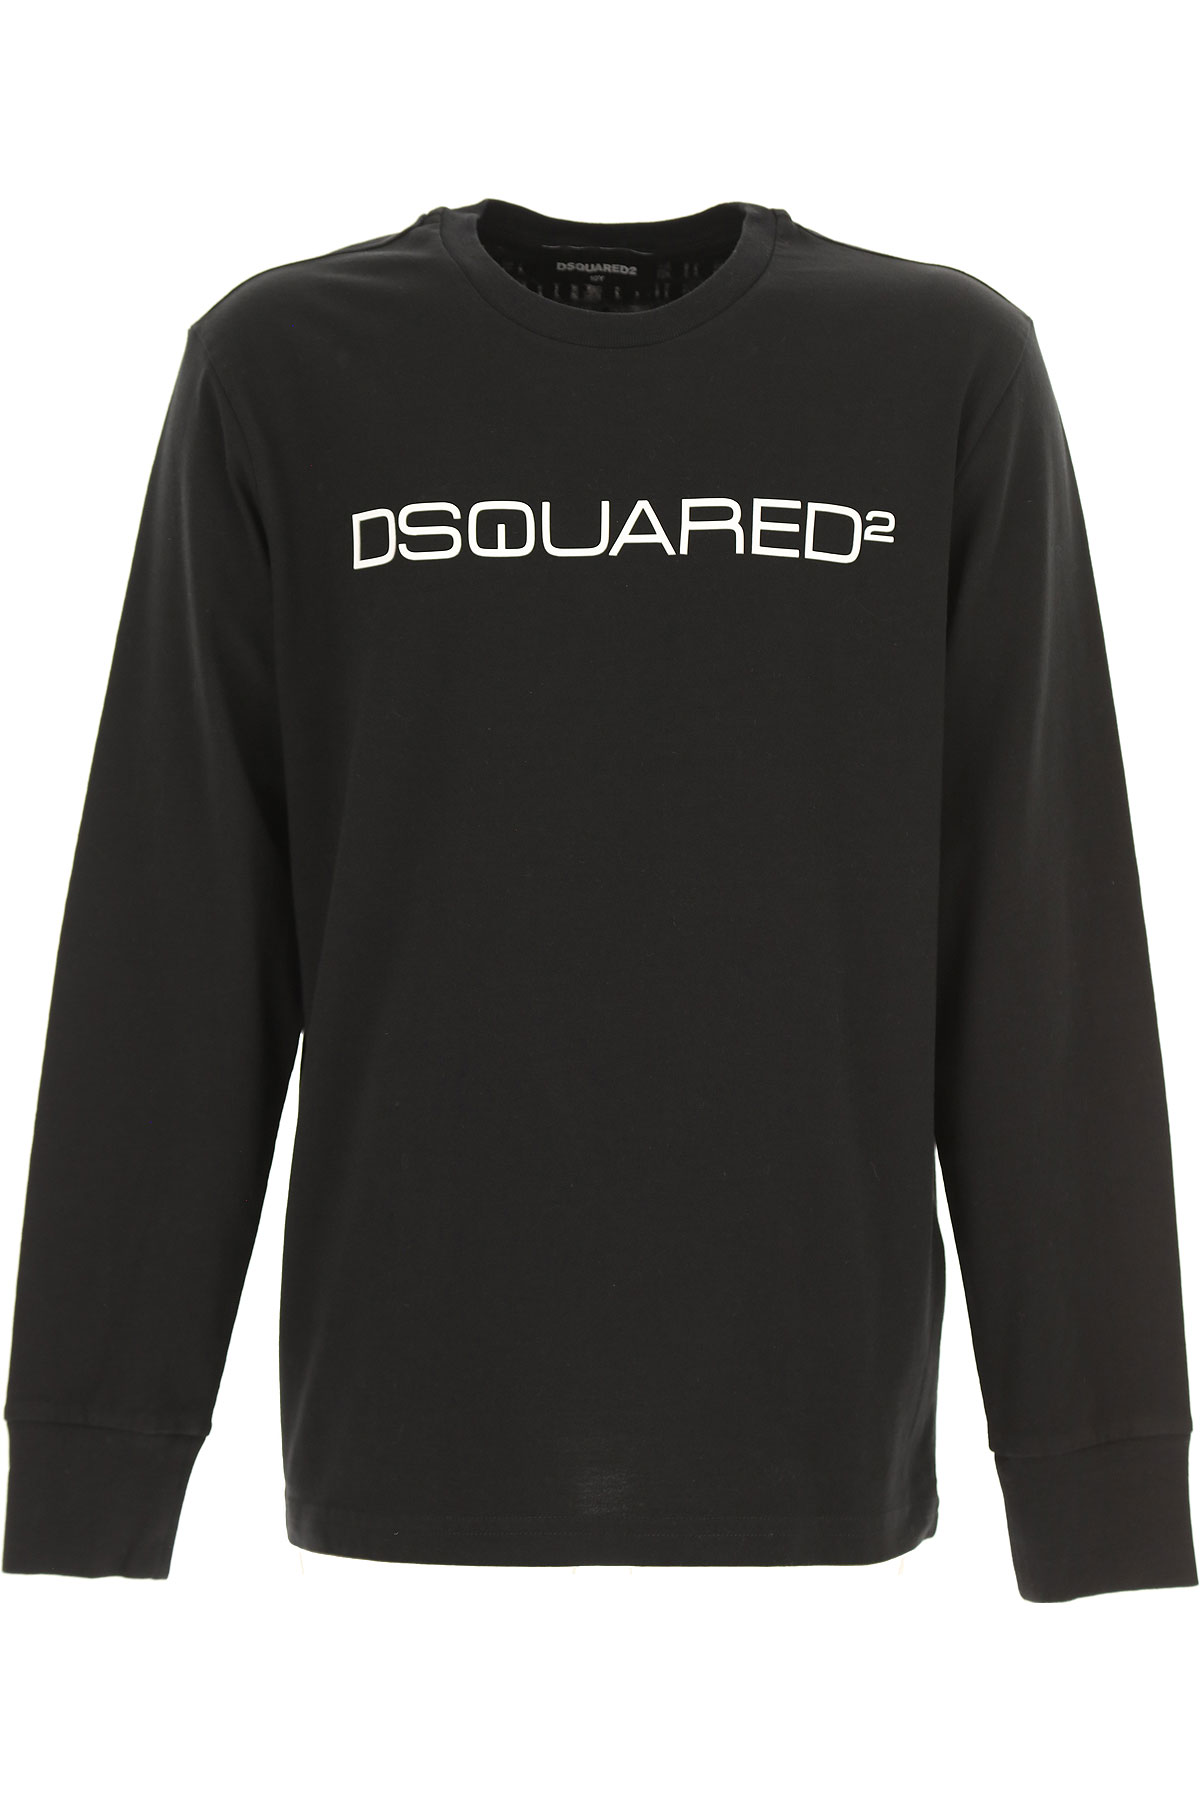 Kidswear Dsquared2, Style code: dq0491-d002f-dq900